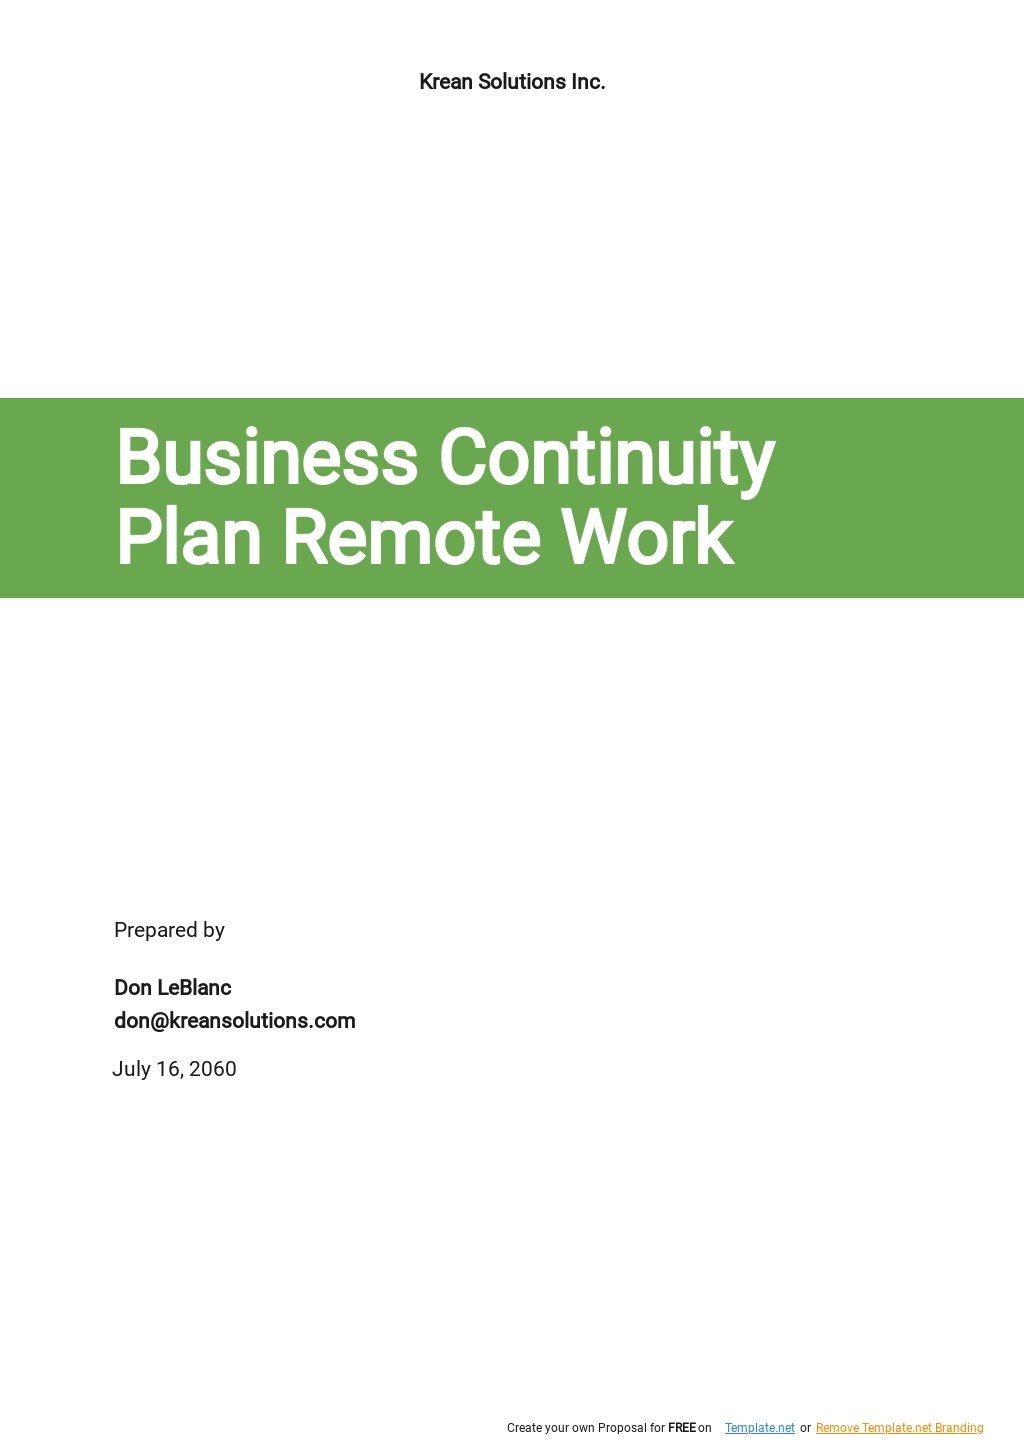 Business Continuity Plan Remote Work Template.jpe